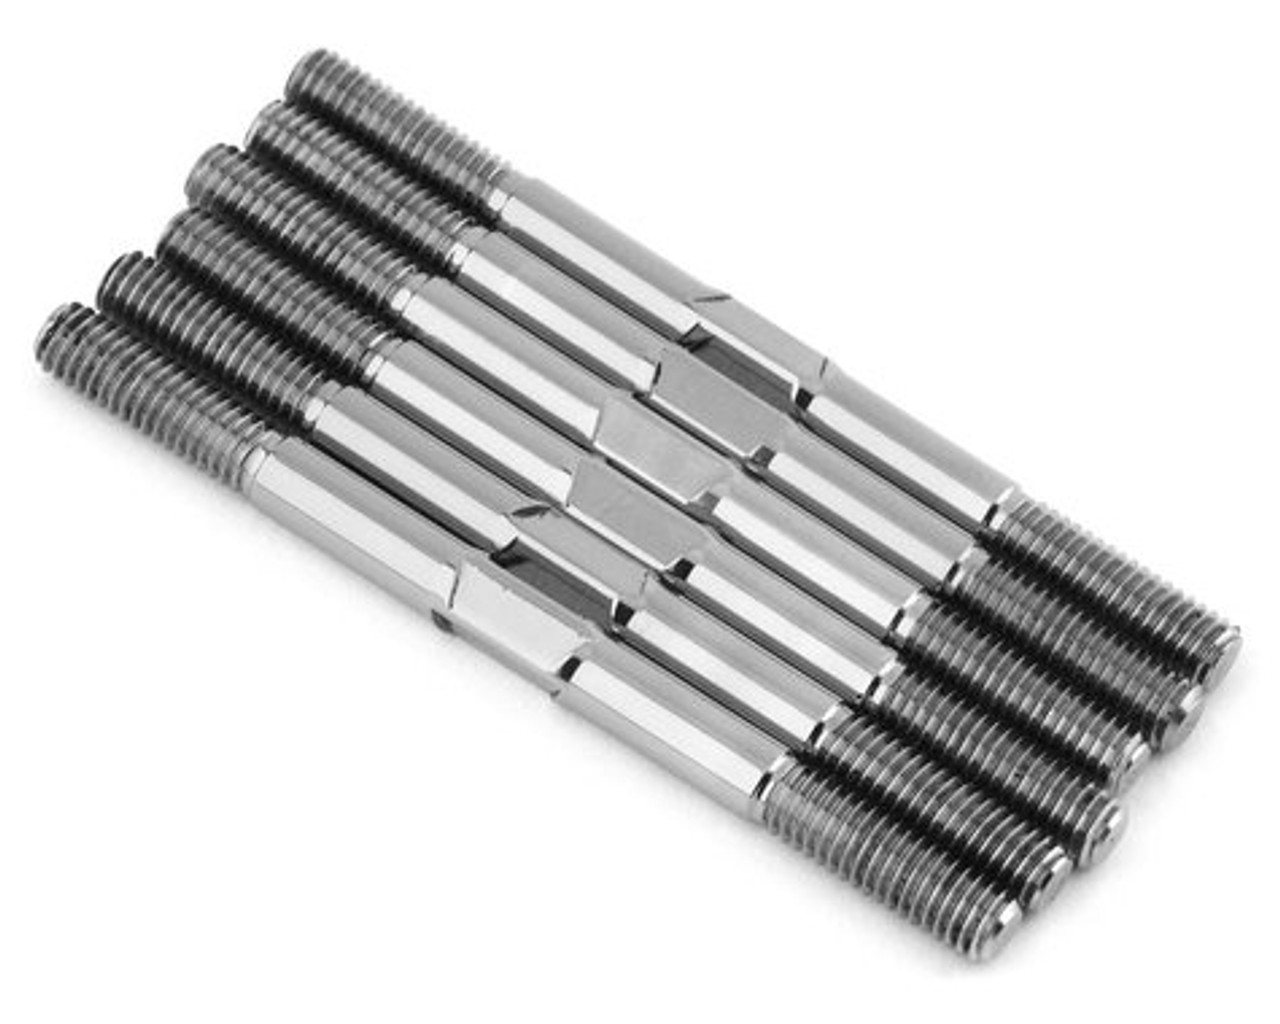 1UP Racing TLR 22 5.0 Pro Duty Titanium Turnbuckle Set (Raw Silver)